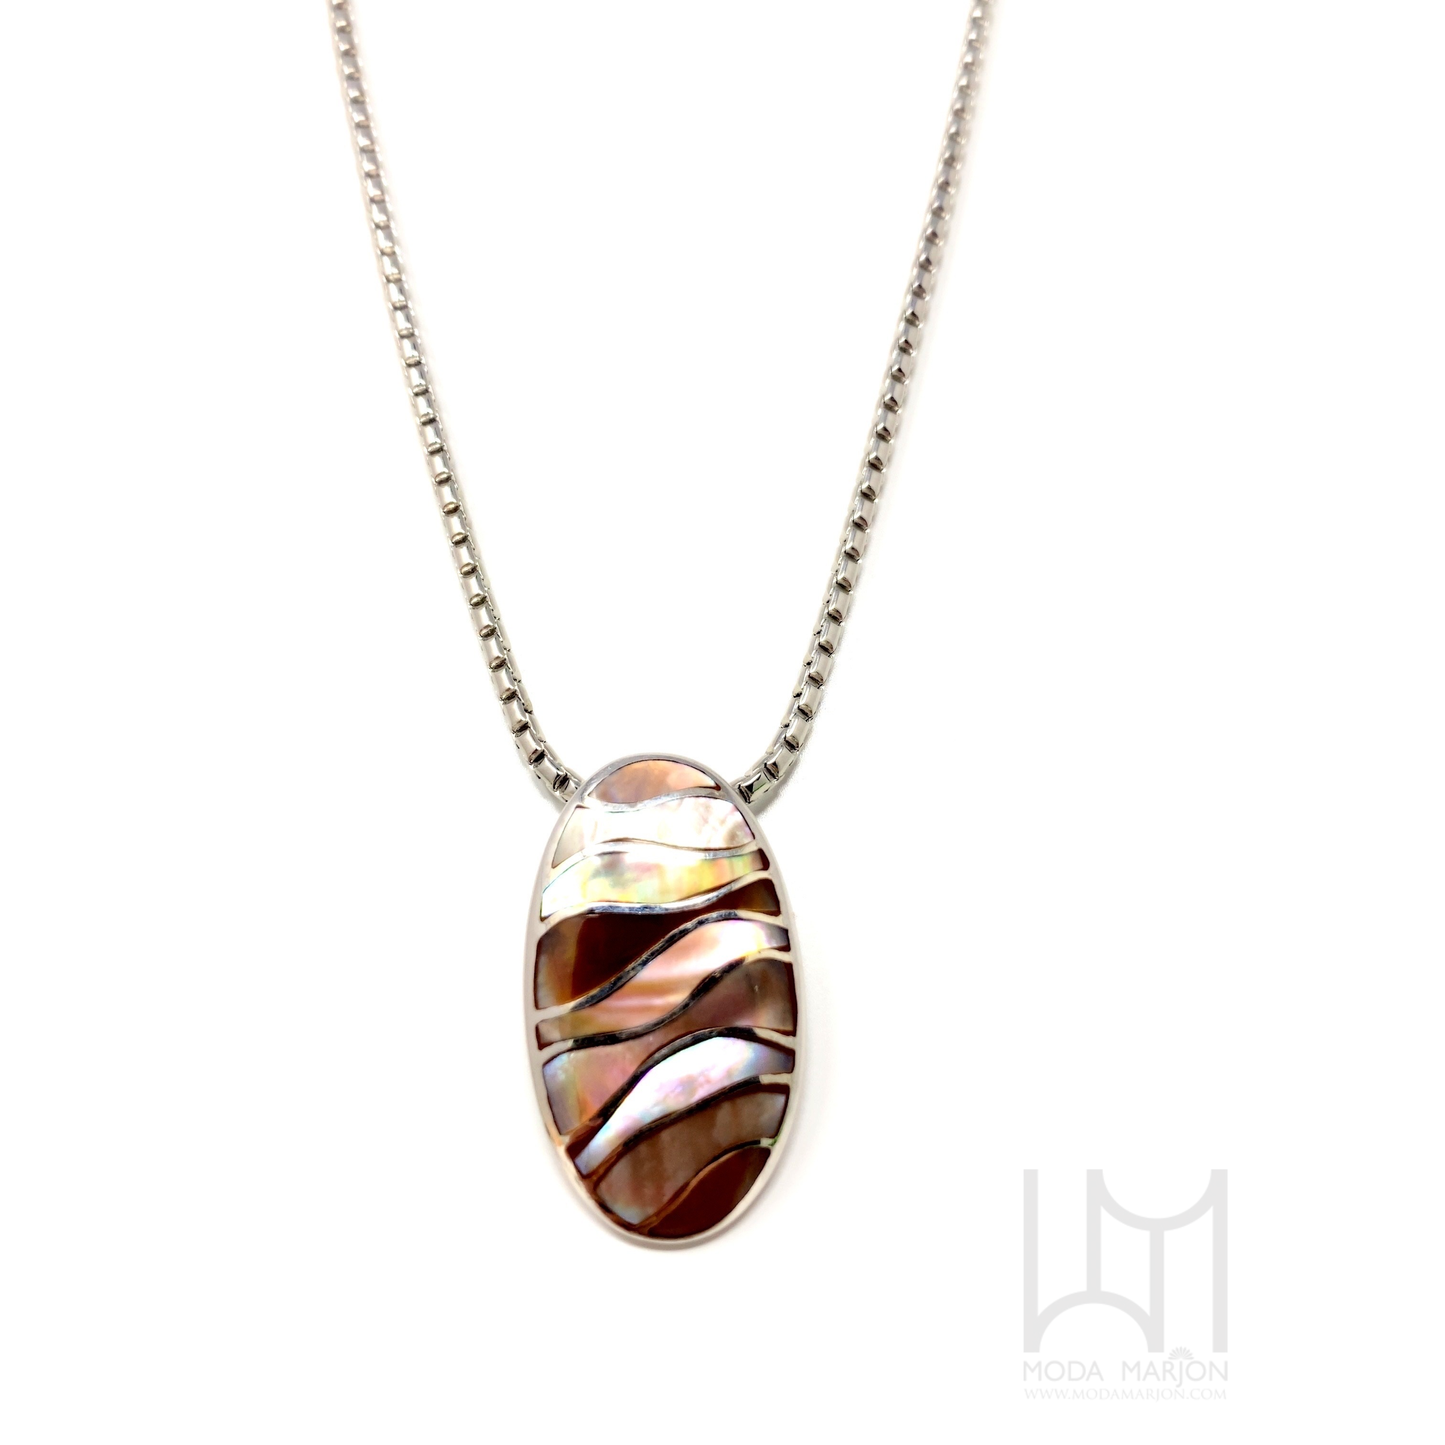 Mosaic Inlay Multi-shades Of Mother-Of-Pearl Pendant